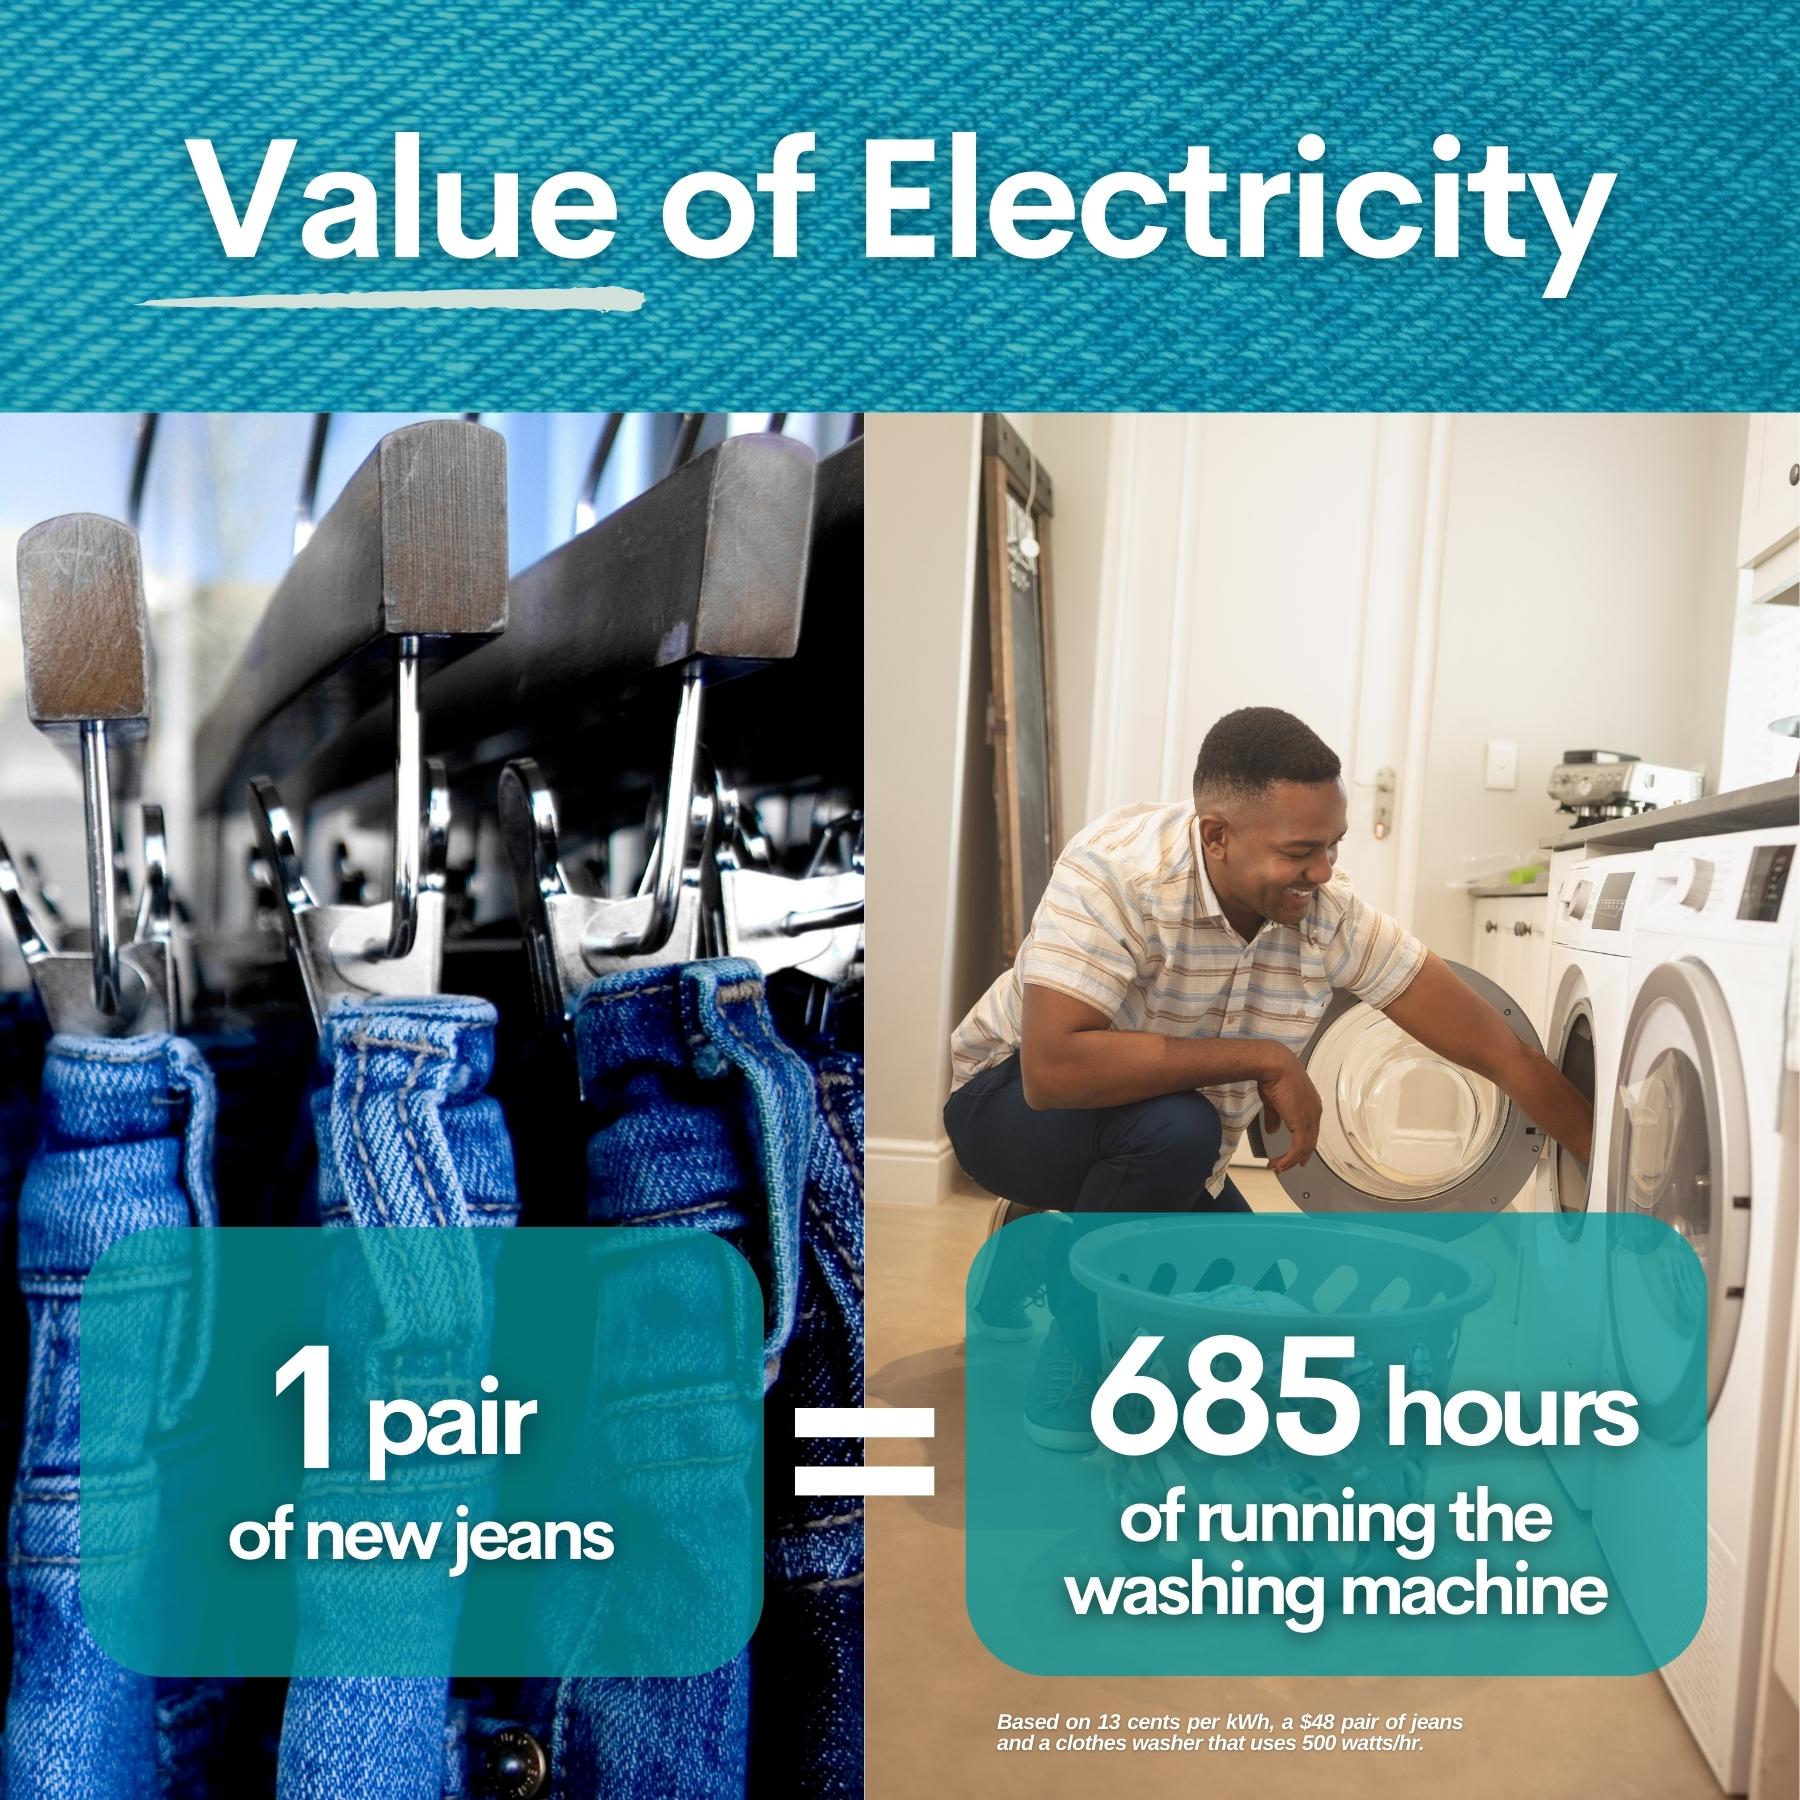 Photo showing the cost of a pair of jeans is equal to the electricity cost of 685 hours of running a washing machine at home.